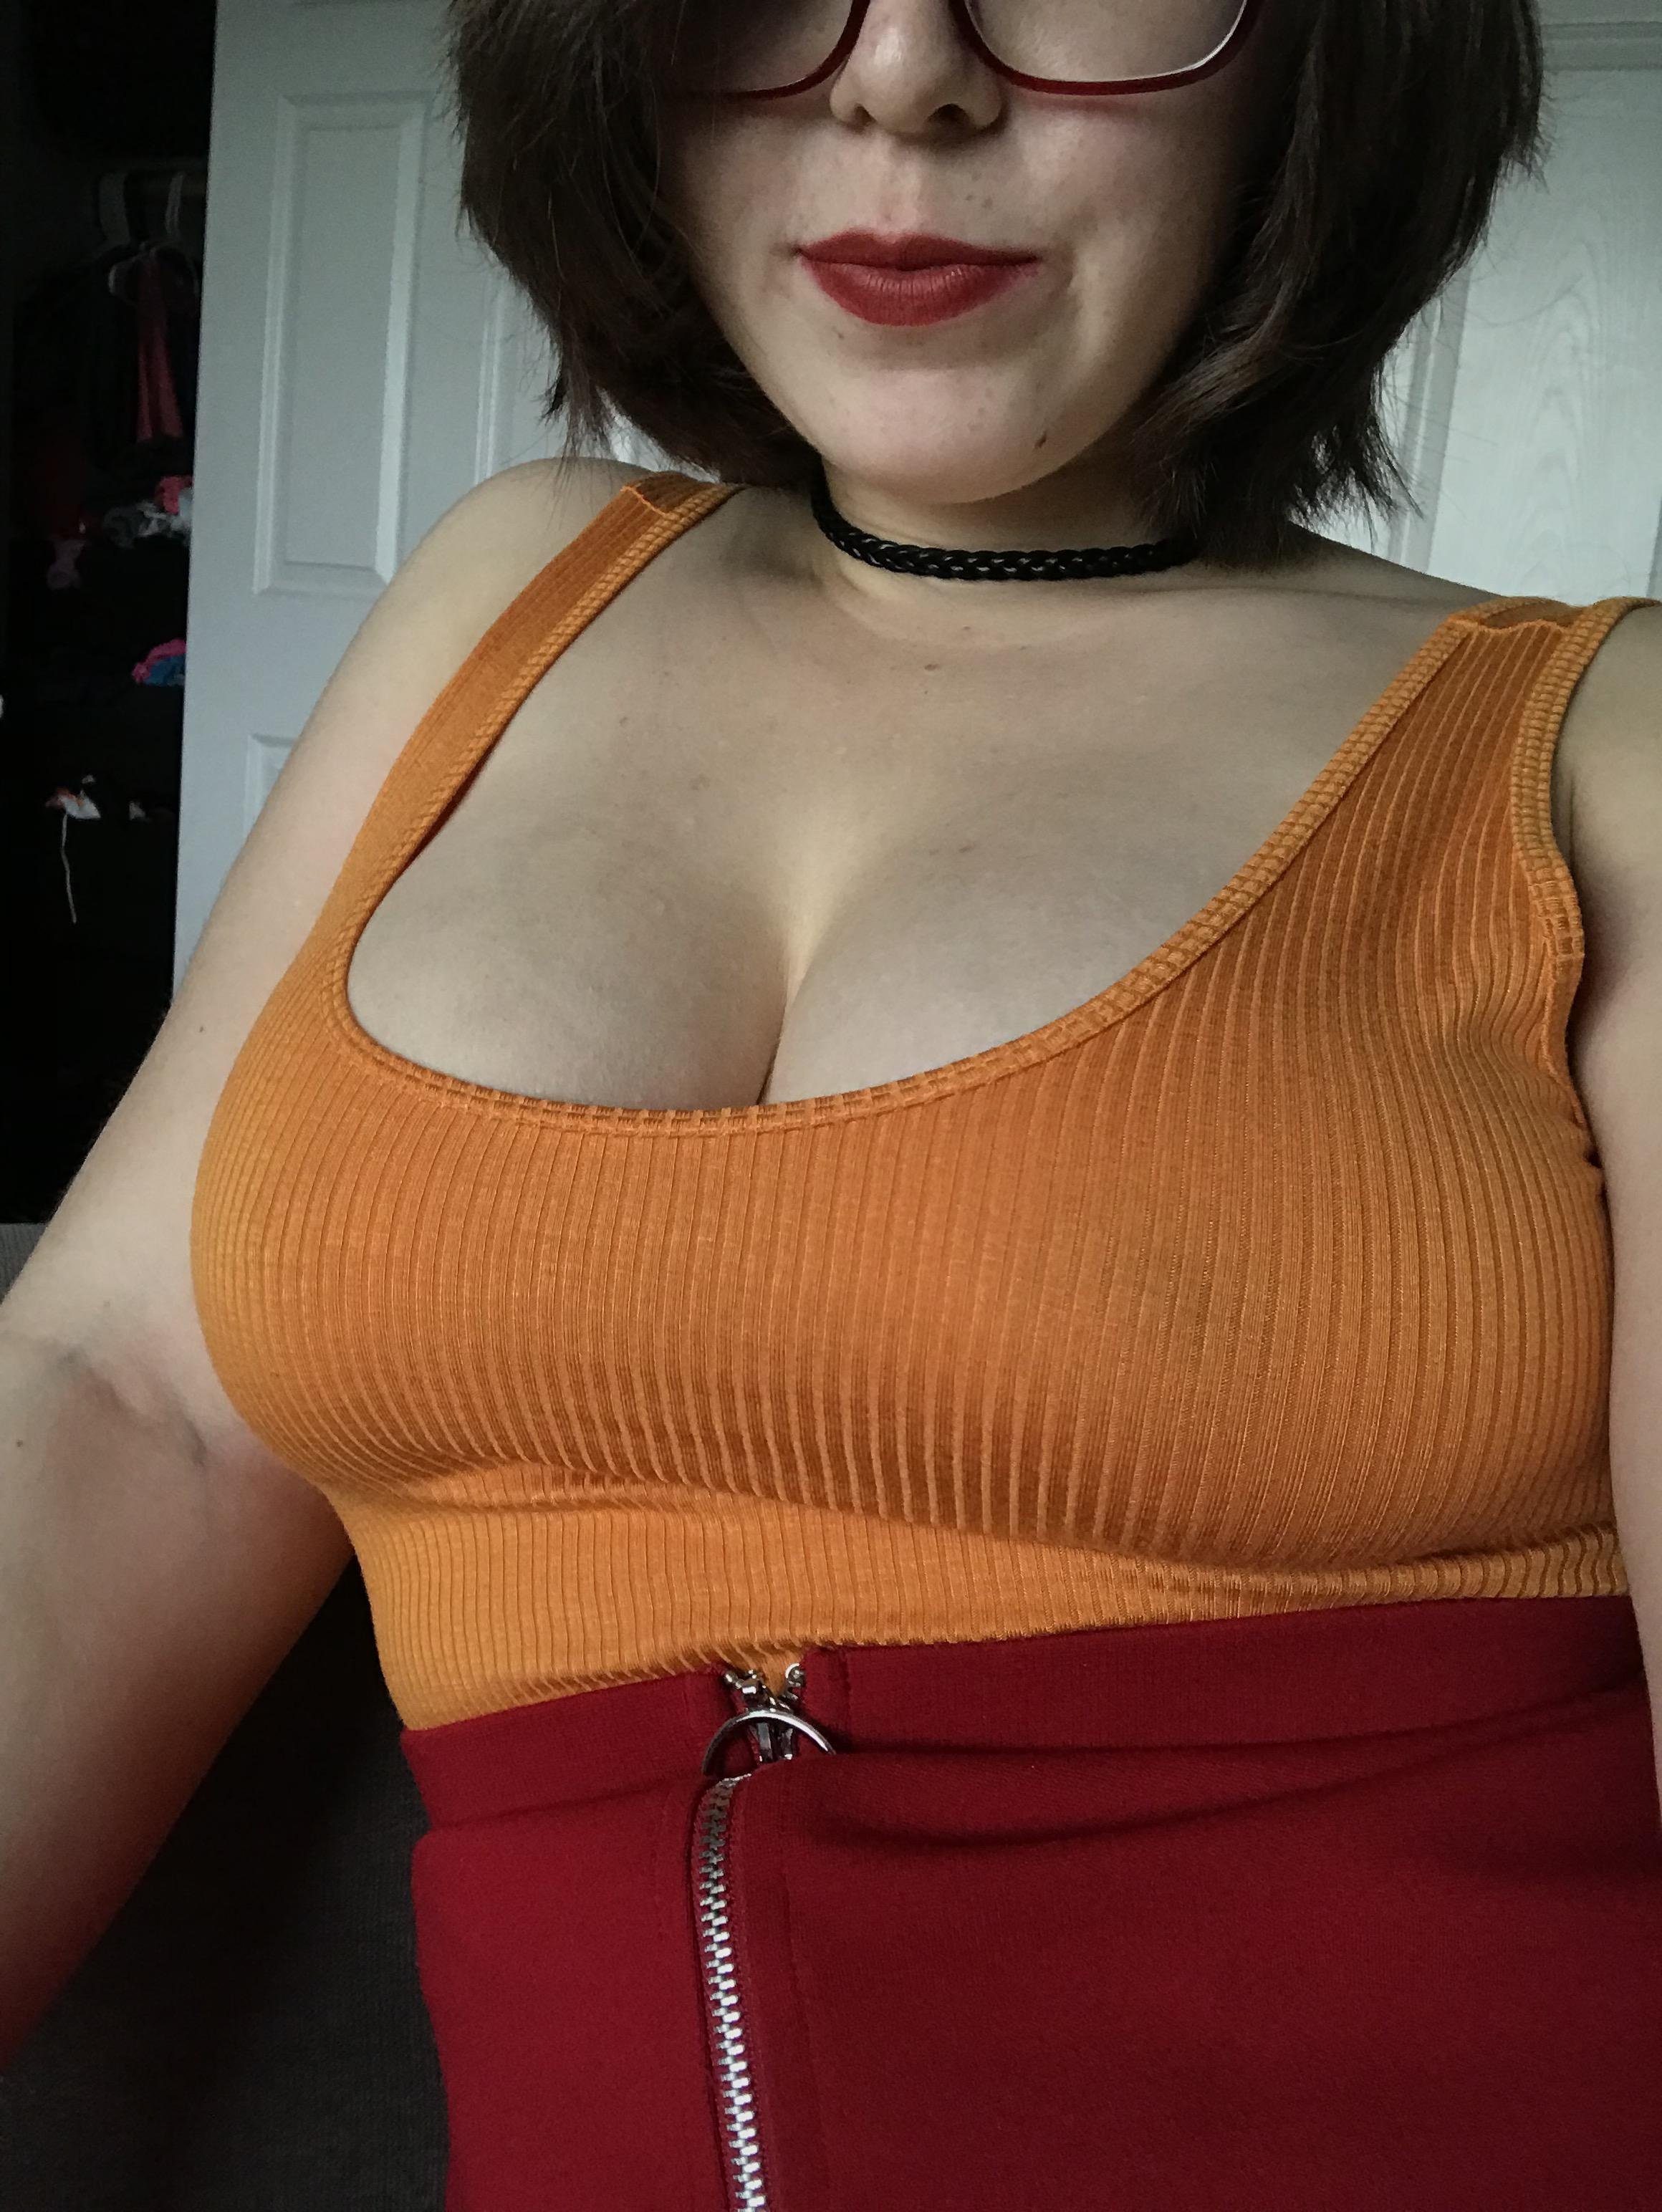 I doubt velma wears bras under her big sweaters, so in order to stay true to character...